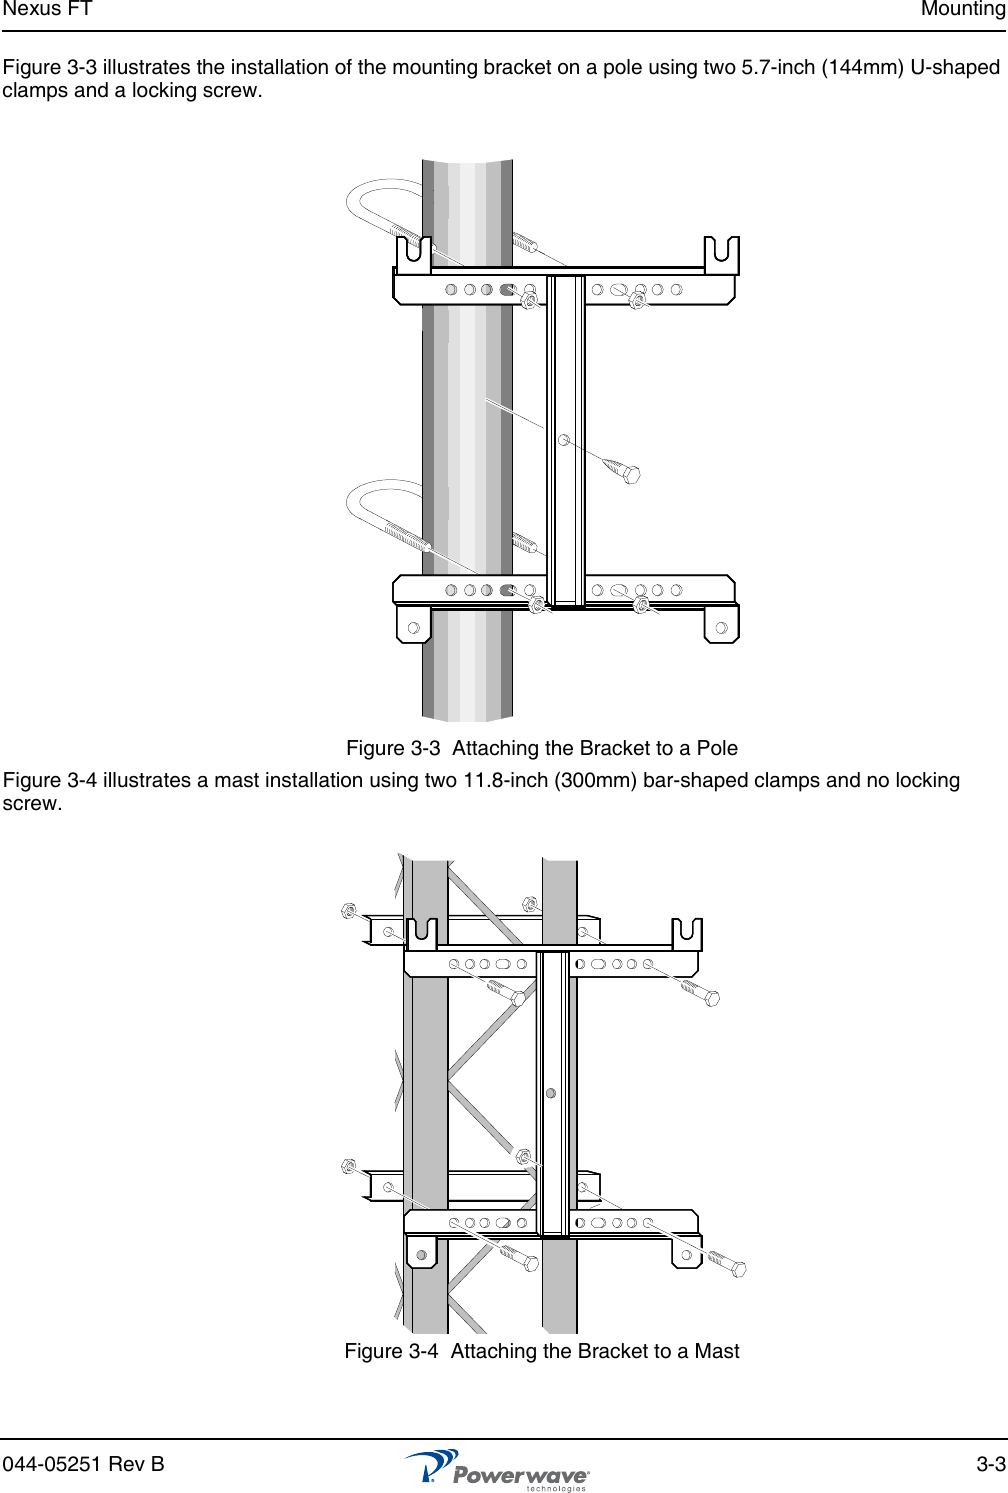 Nexus FT Mounting044-05251 Rev B 3-3Figure 3-3 illustrates the installation of the mounting bracket on a pole using two 5.7-inch (144mm) U-shaped clamps and a locking screw.Figure 3-3  Attaching the Bracket to a PoleFigure 3-4 illustrates a mast installation using two 11.8-inch (300mm) bar-shaped clamps and no locking screw.Figure 3-4  Attaching the Bracket to a Mast